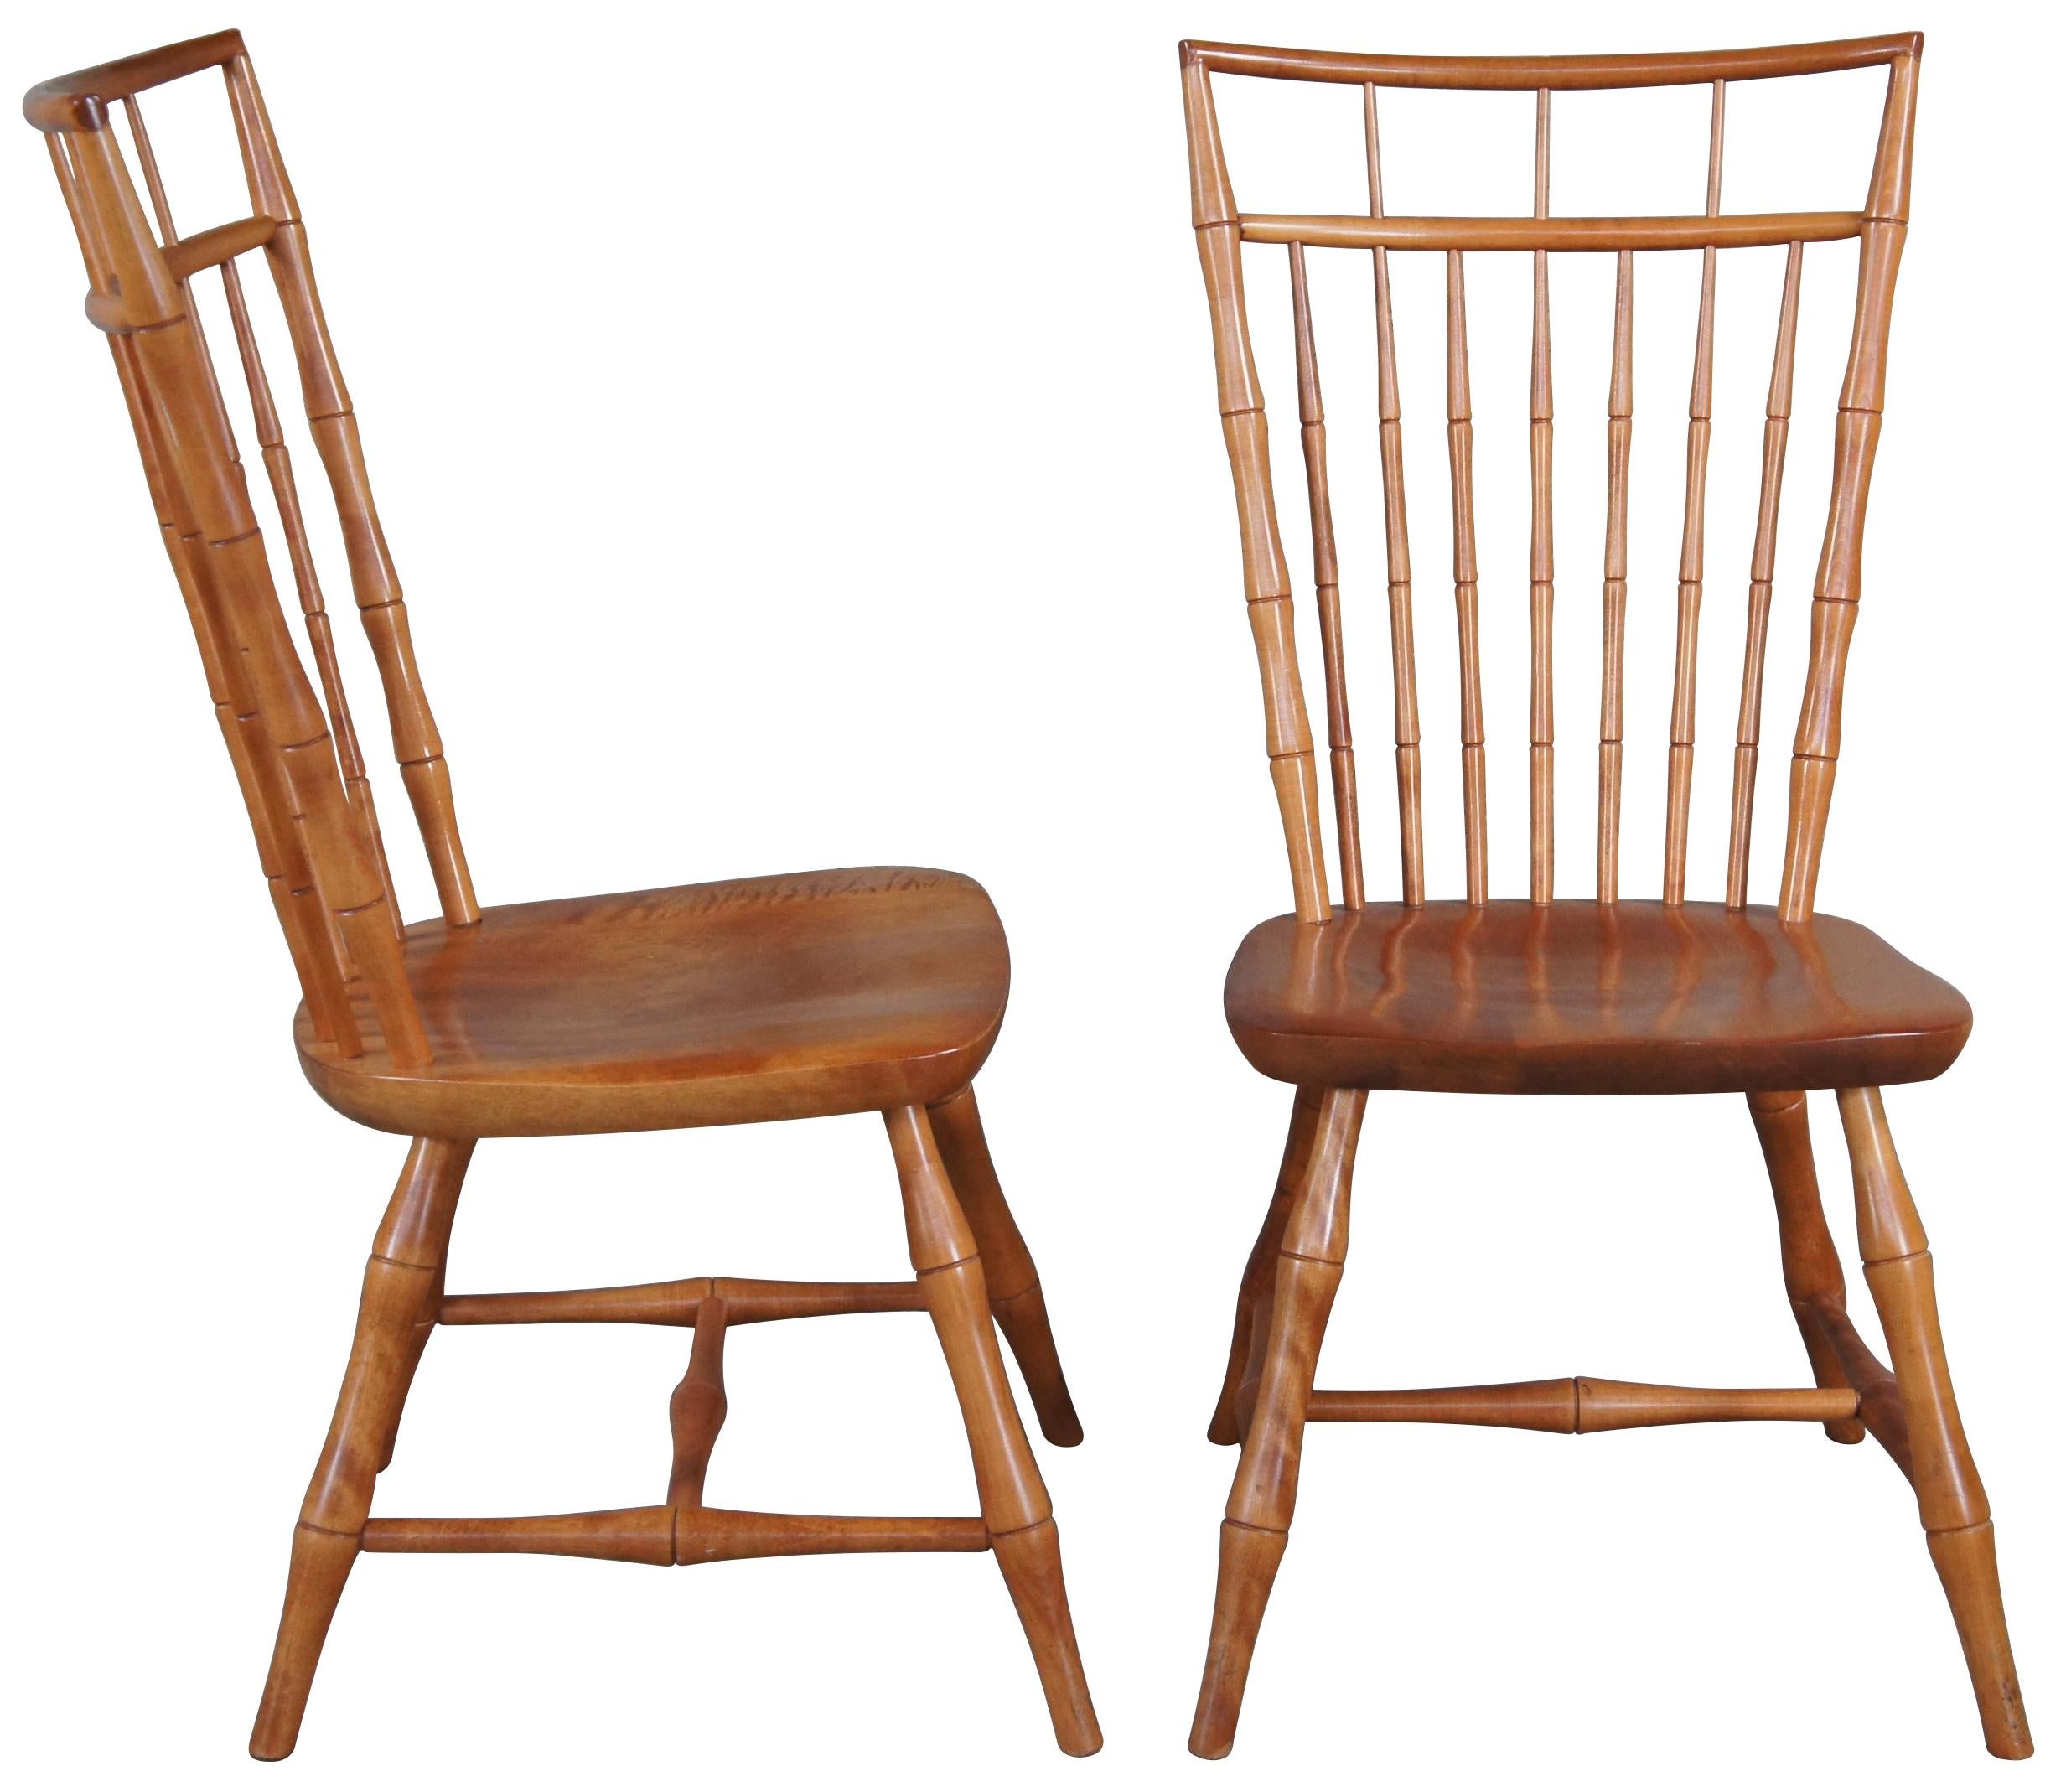 Six gorgeous birdcage Windsor style dining chairs manufactured by the Nichols & Stone Company. The chairs are expertly crafted of light maple with split wedge mortise and tenon joinery in the seats & top of the crest rails. Features bamboo shaped